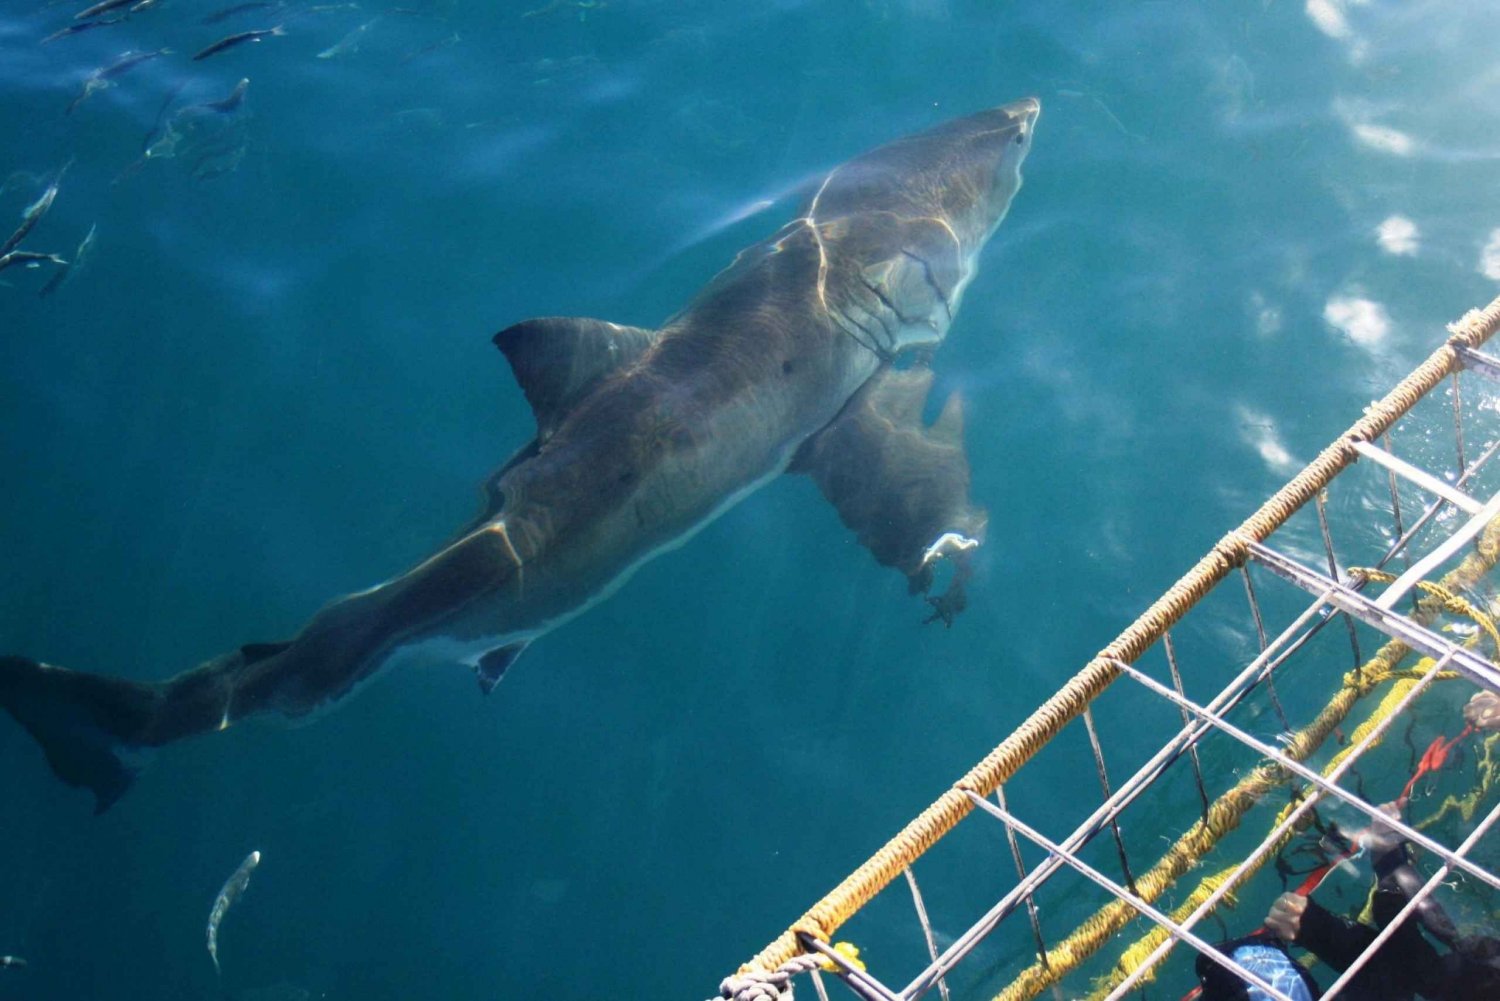 From Hermanus or Shark Cage Diving Experience